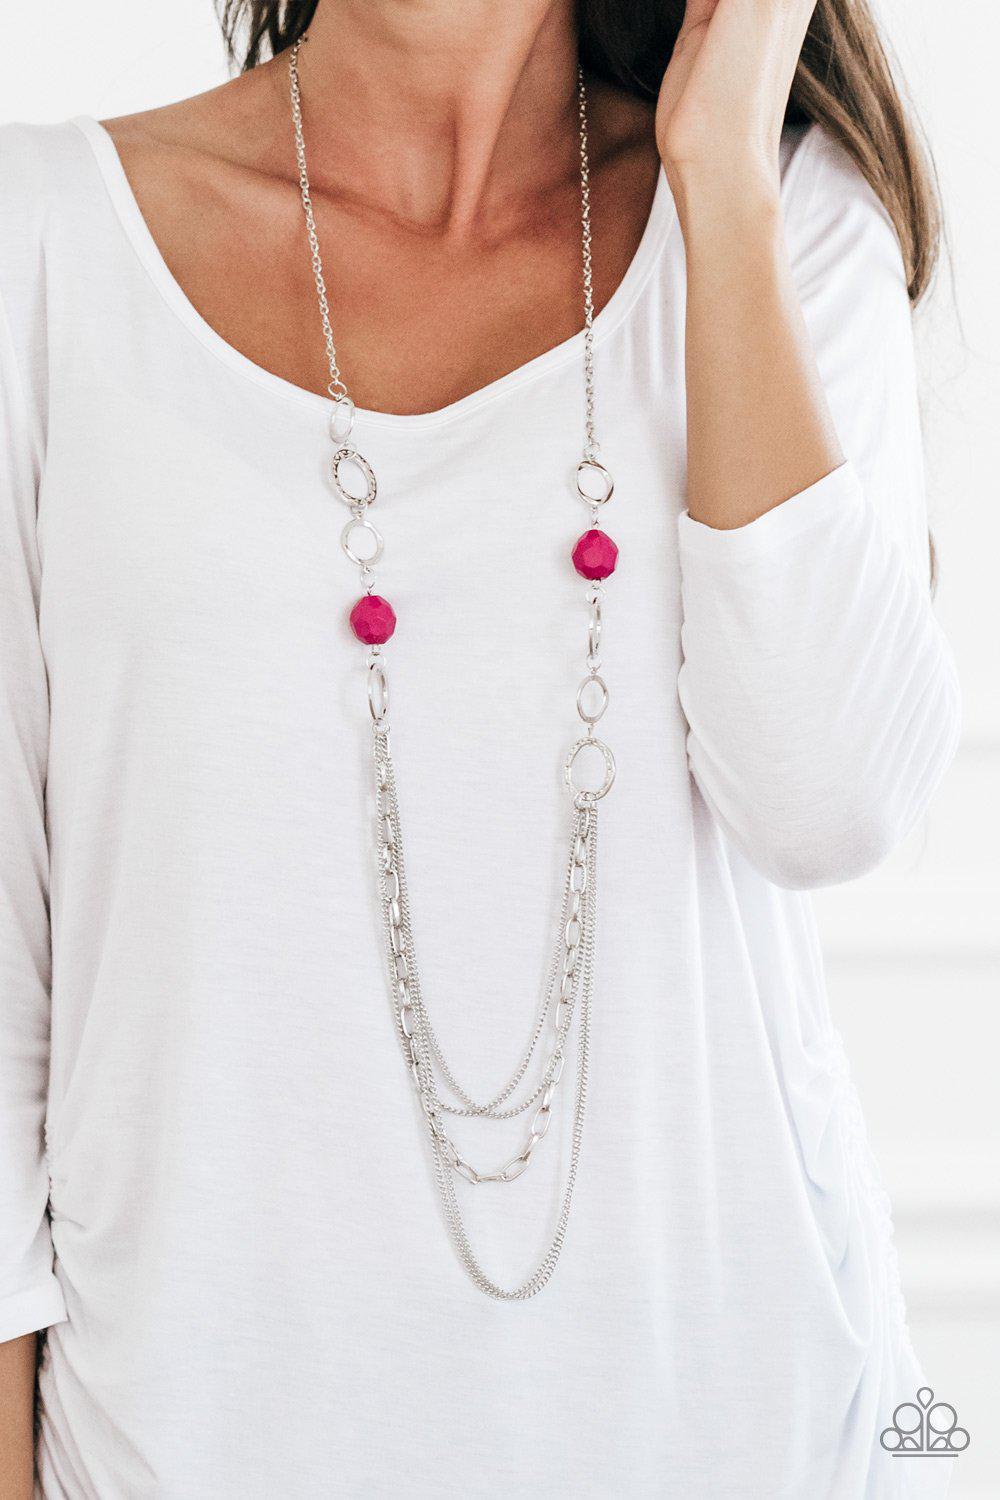 Margarita Masquerades Silver and Pink Necklace - Paparazzi Accessories-CarasShop.com - $5 Jewelry by Cara Jewels